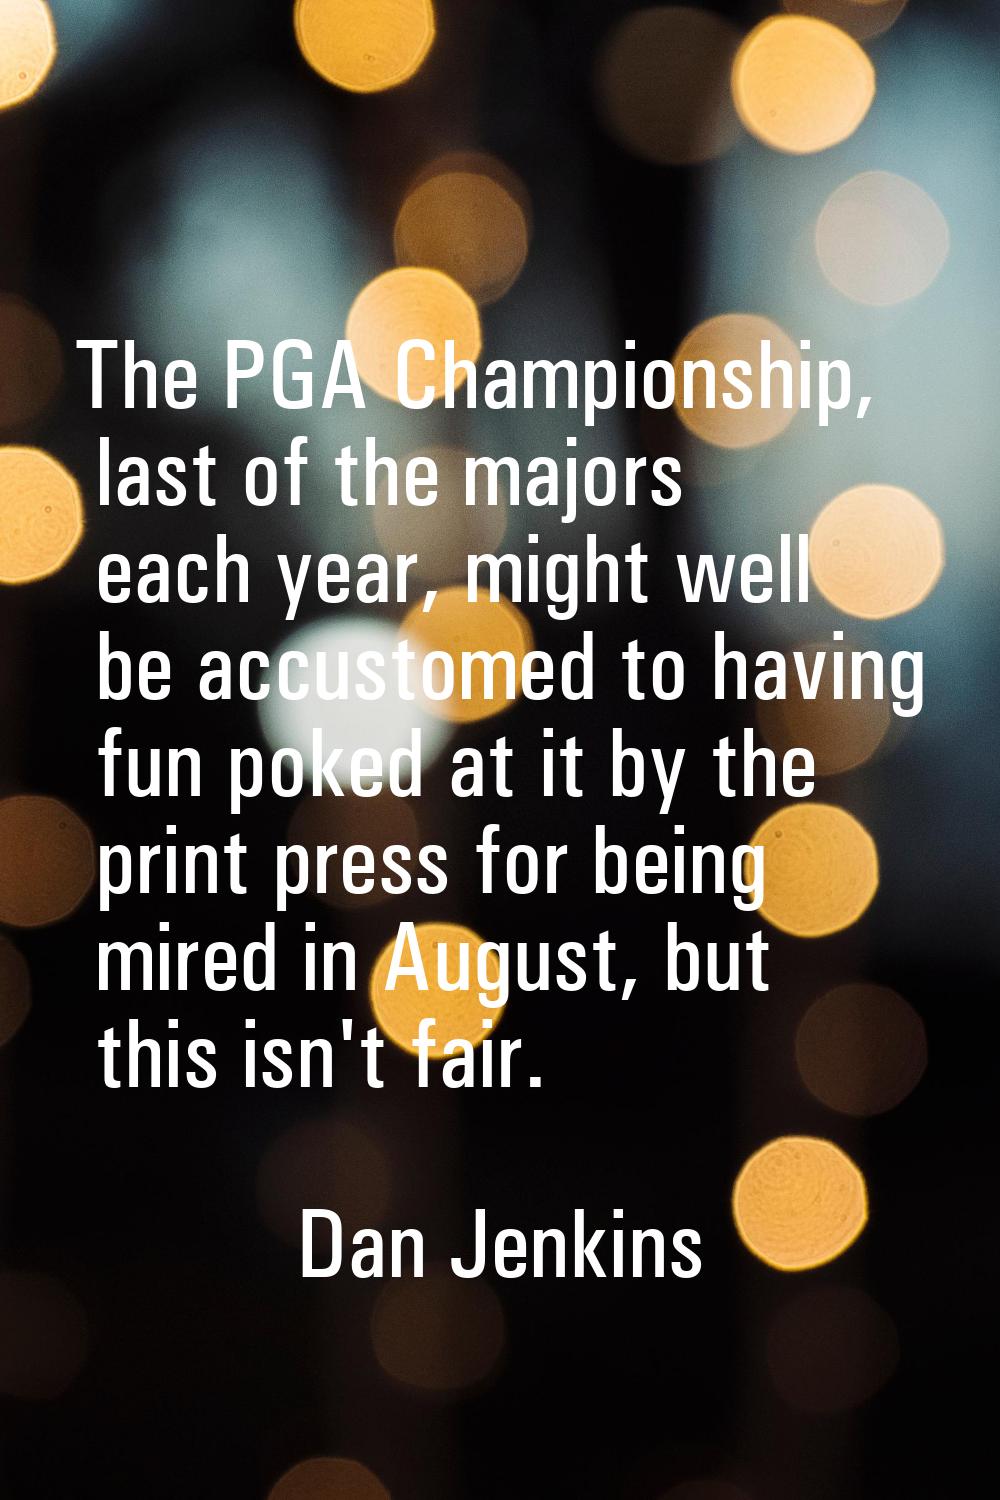 The PGA Championship, last of the majors each year, might well be accustomed to having fun poked at